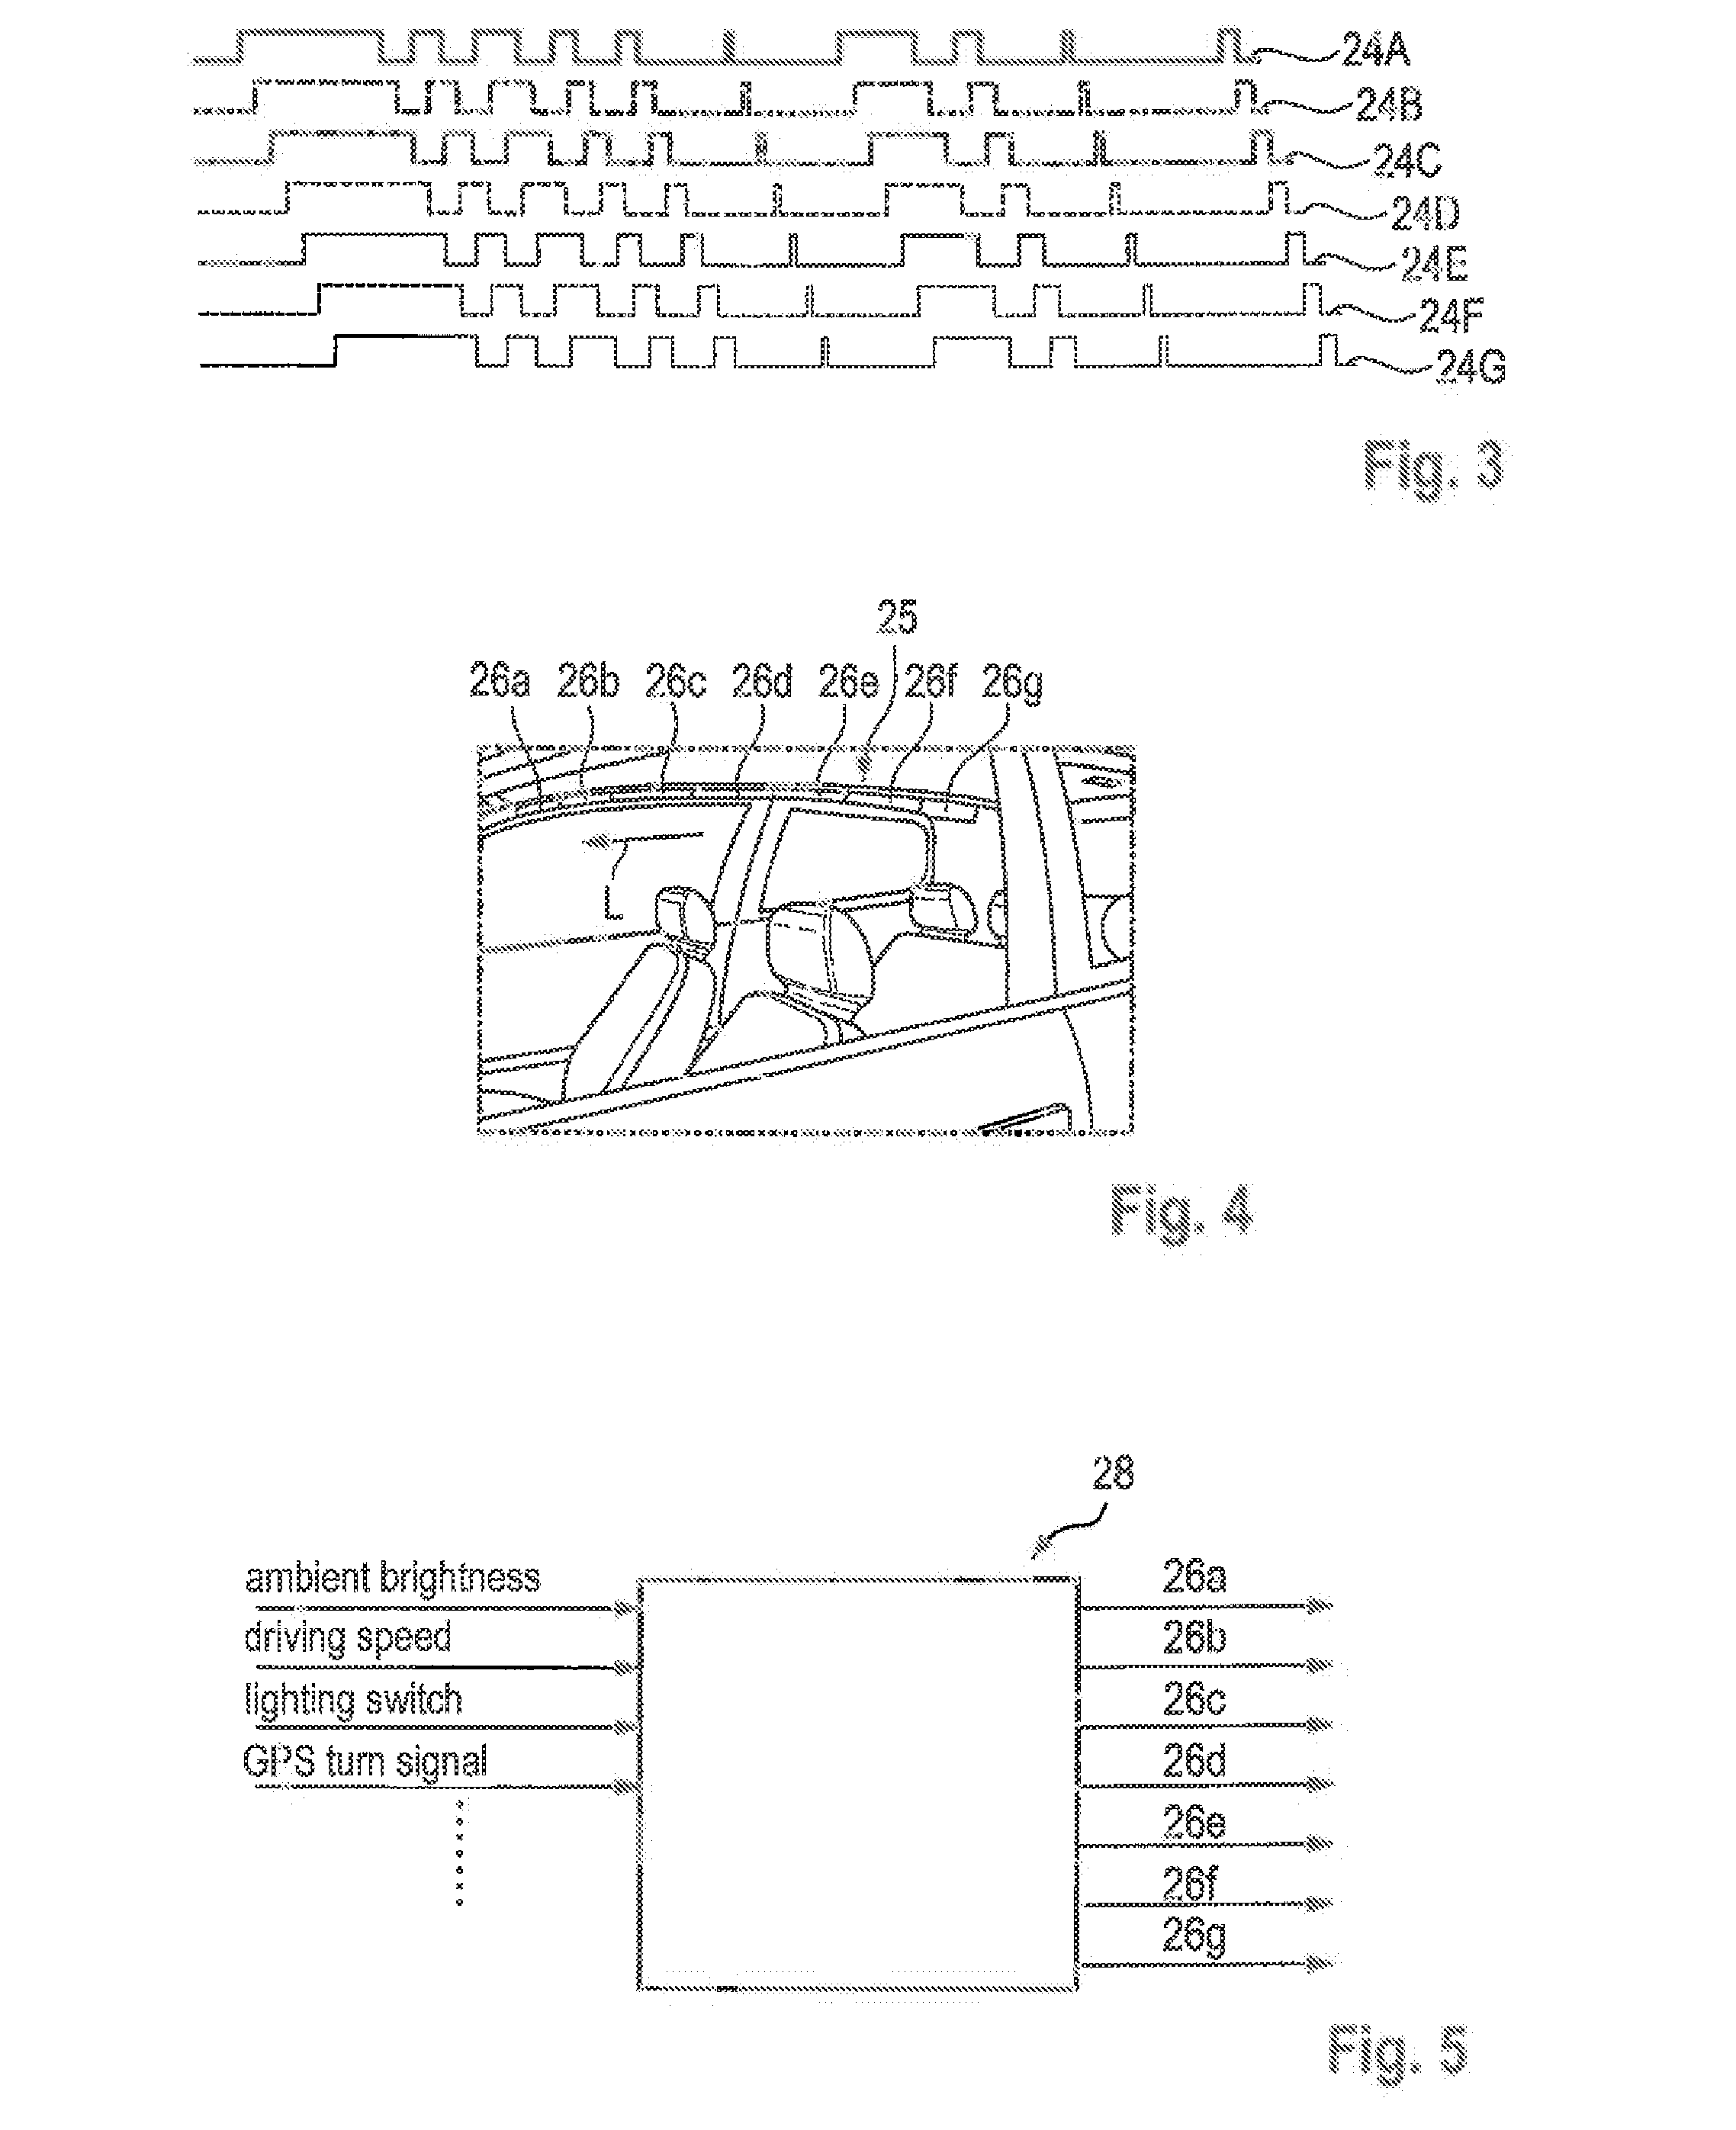 Method for controlling an interior lighting system in a vehicle and interior lighting system